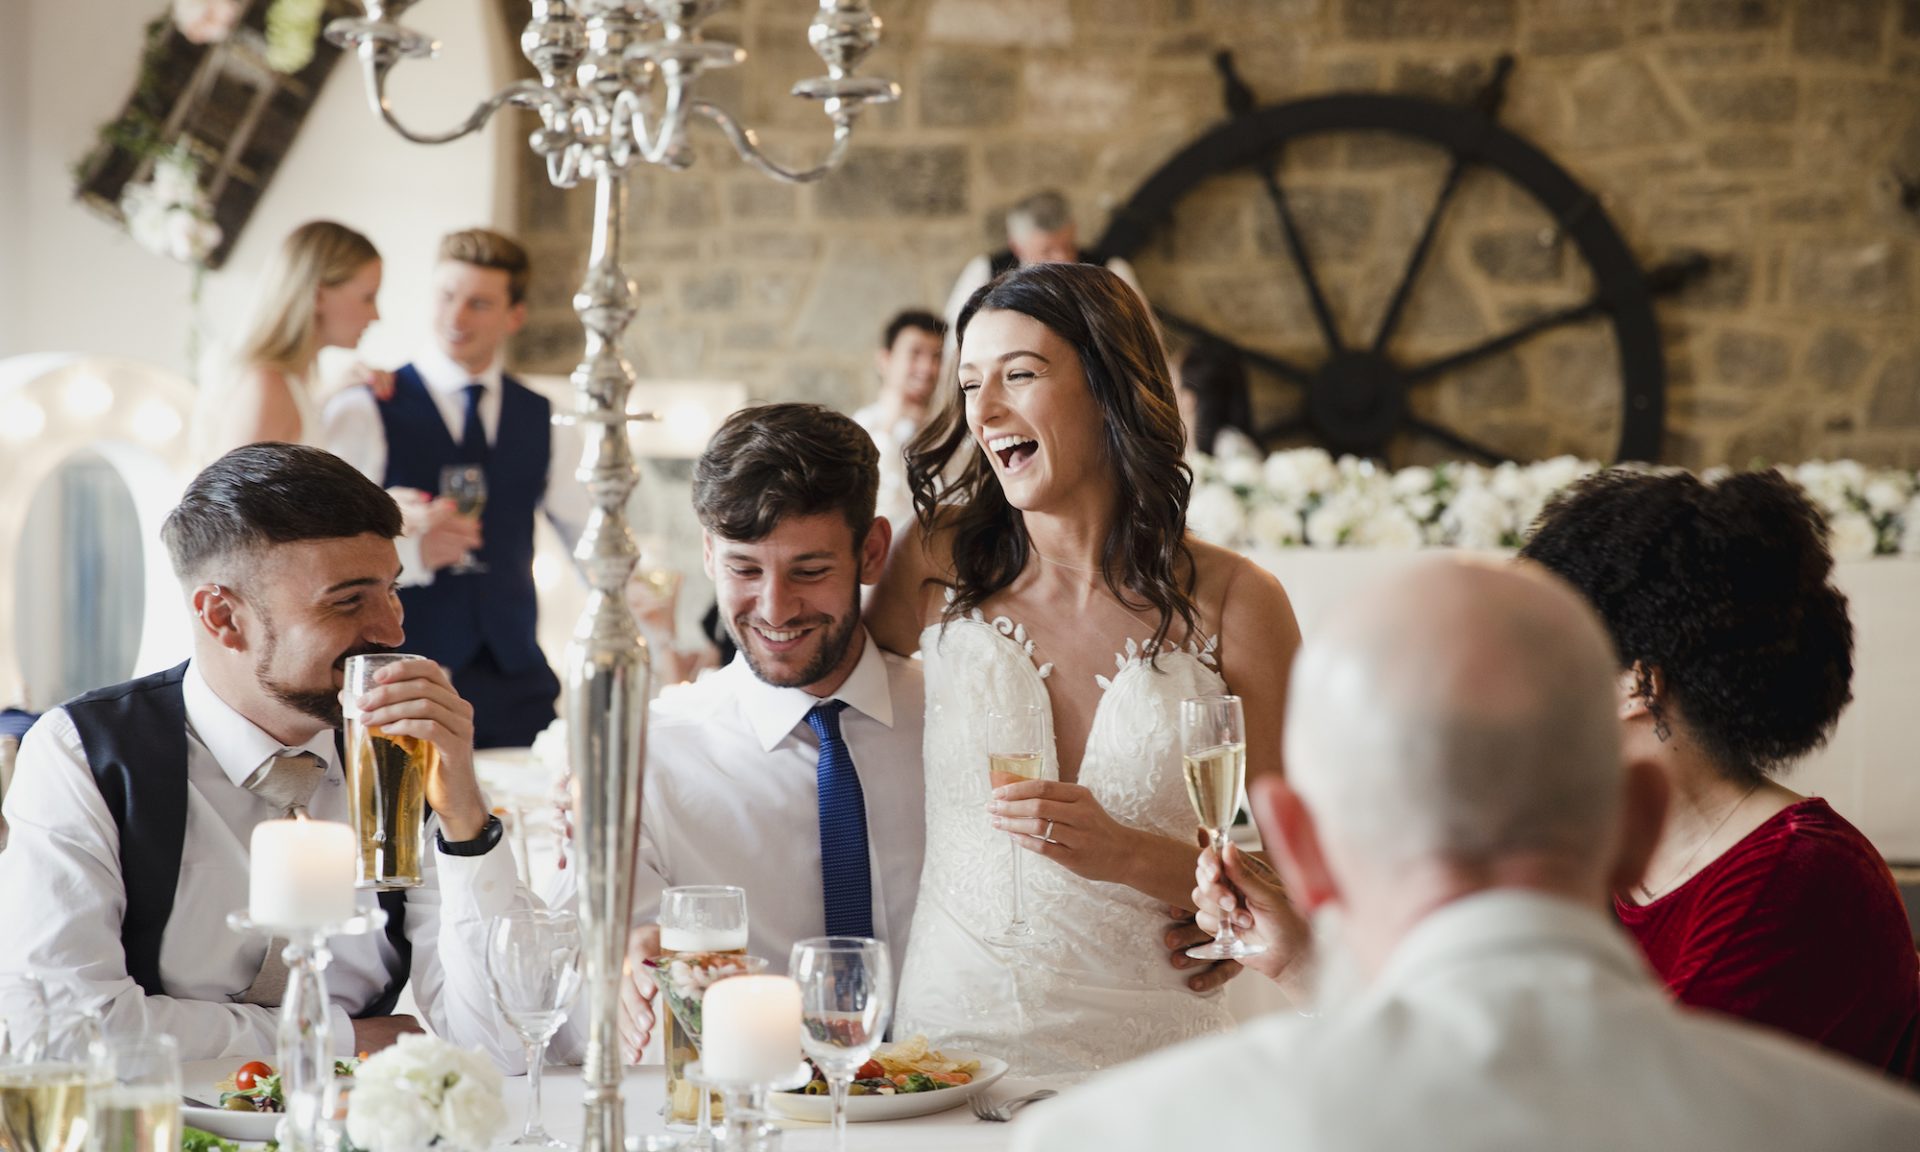 Wedding Gifts That Mean (but Don’t Cost) a Lot - NerdWallet